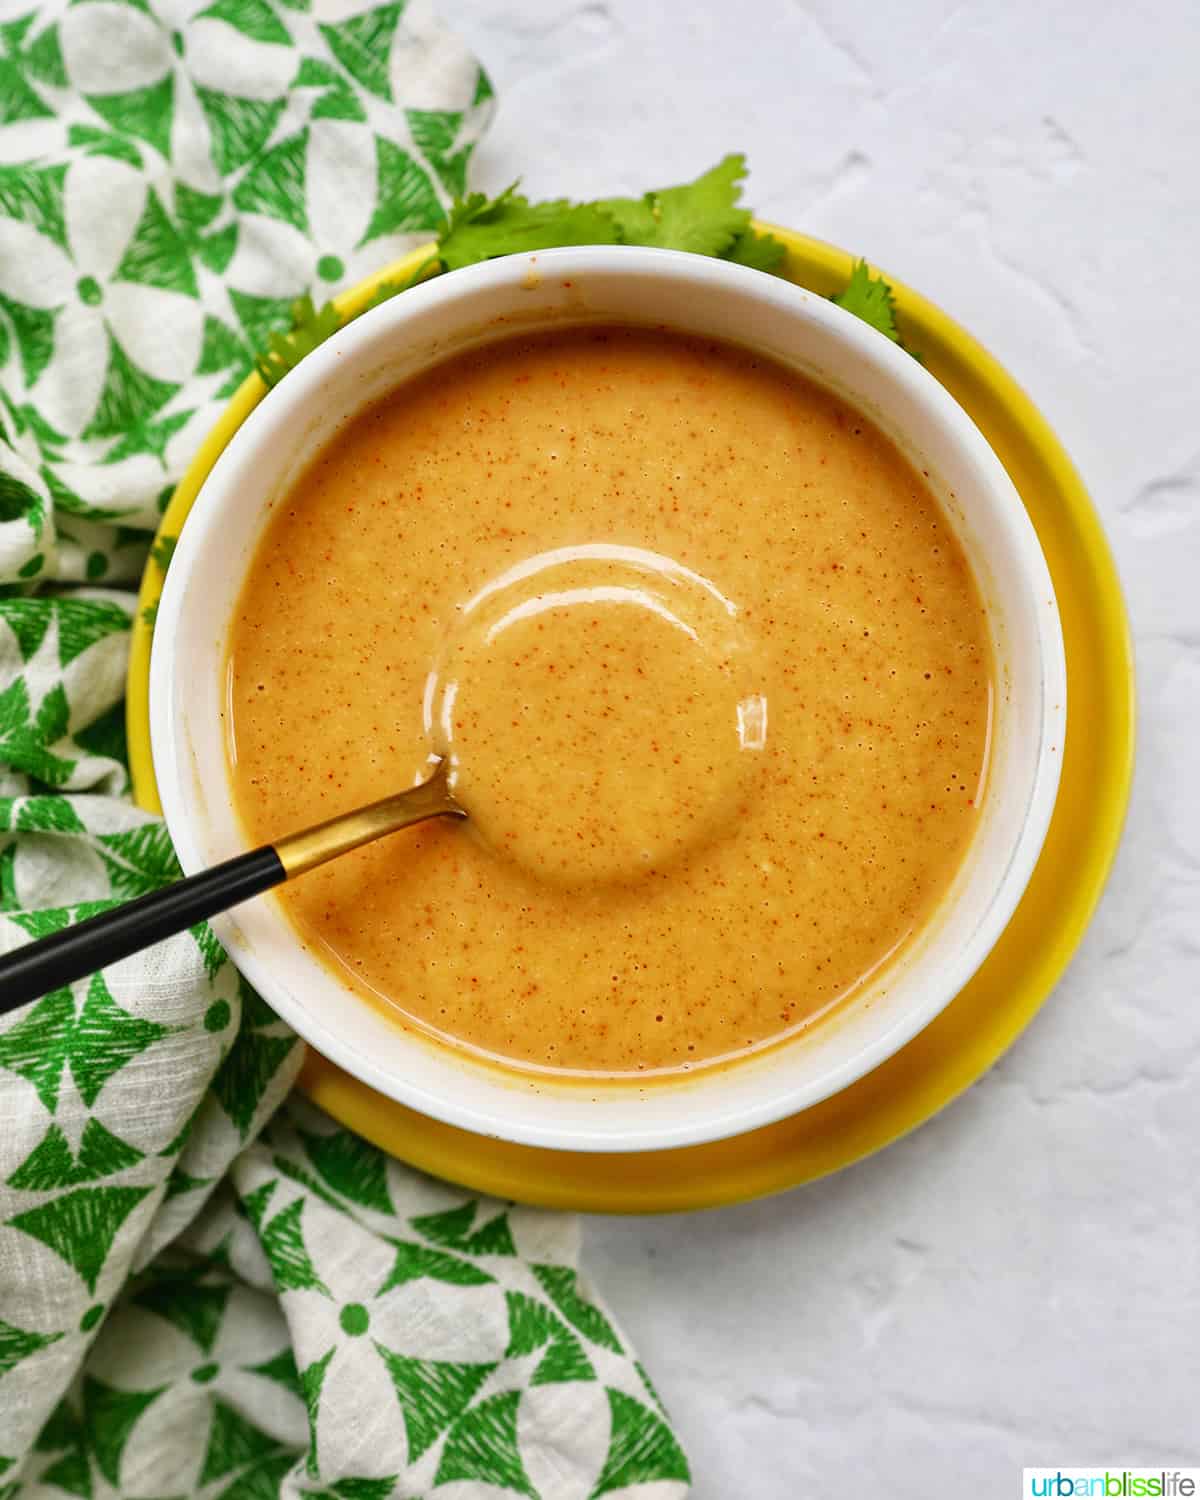 spoon in a bowl of hand dipping a chicken tender into a bowl of honey mustard dipping sauce.